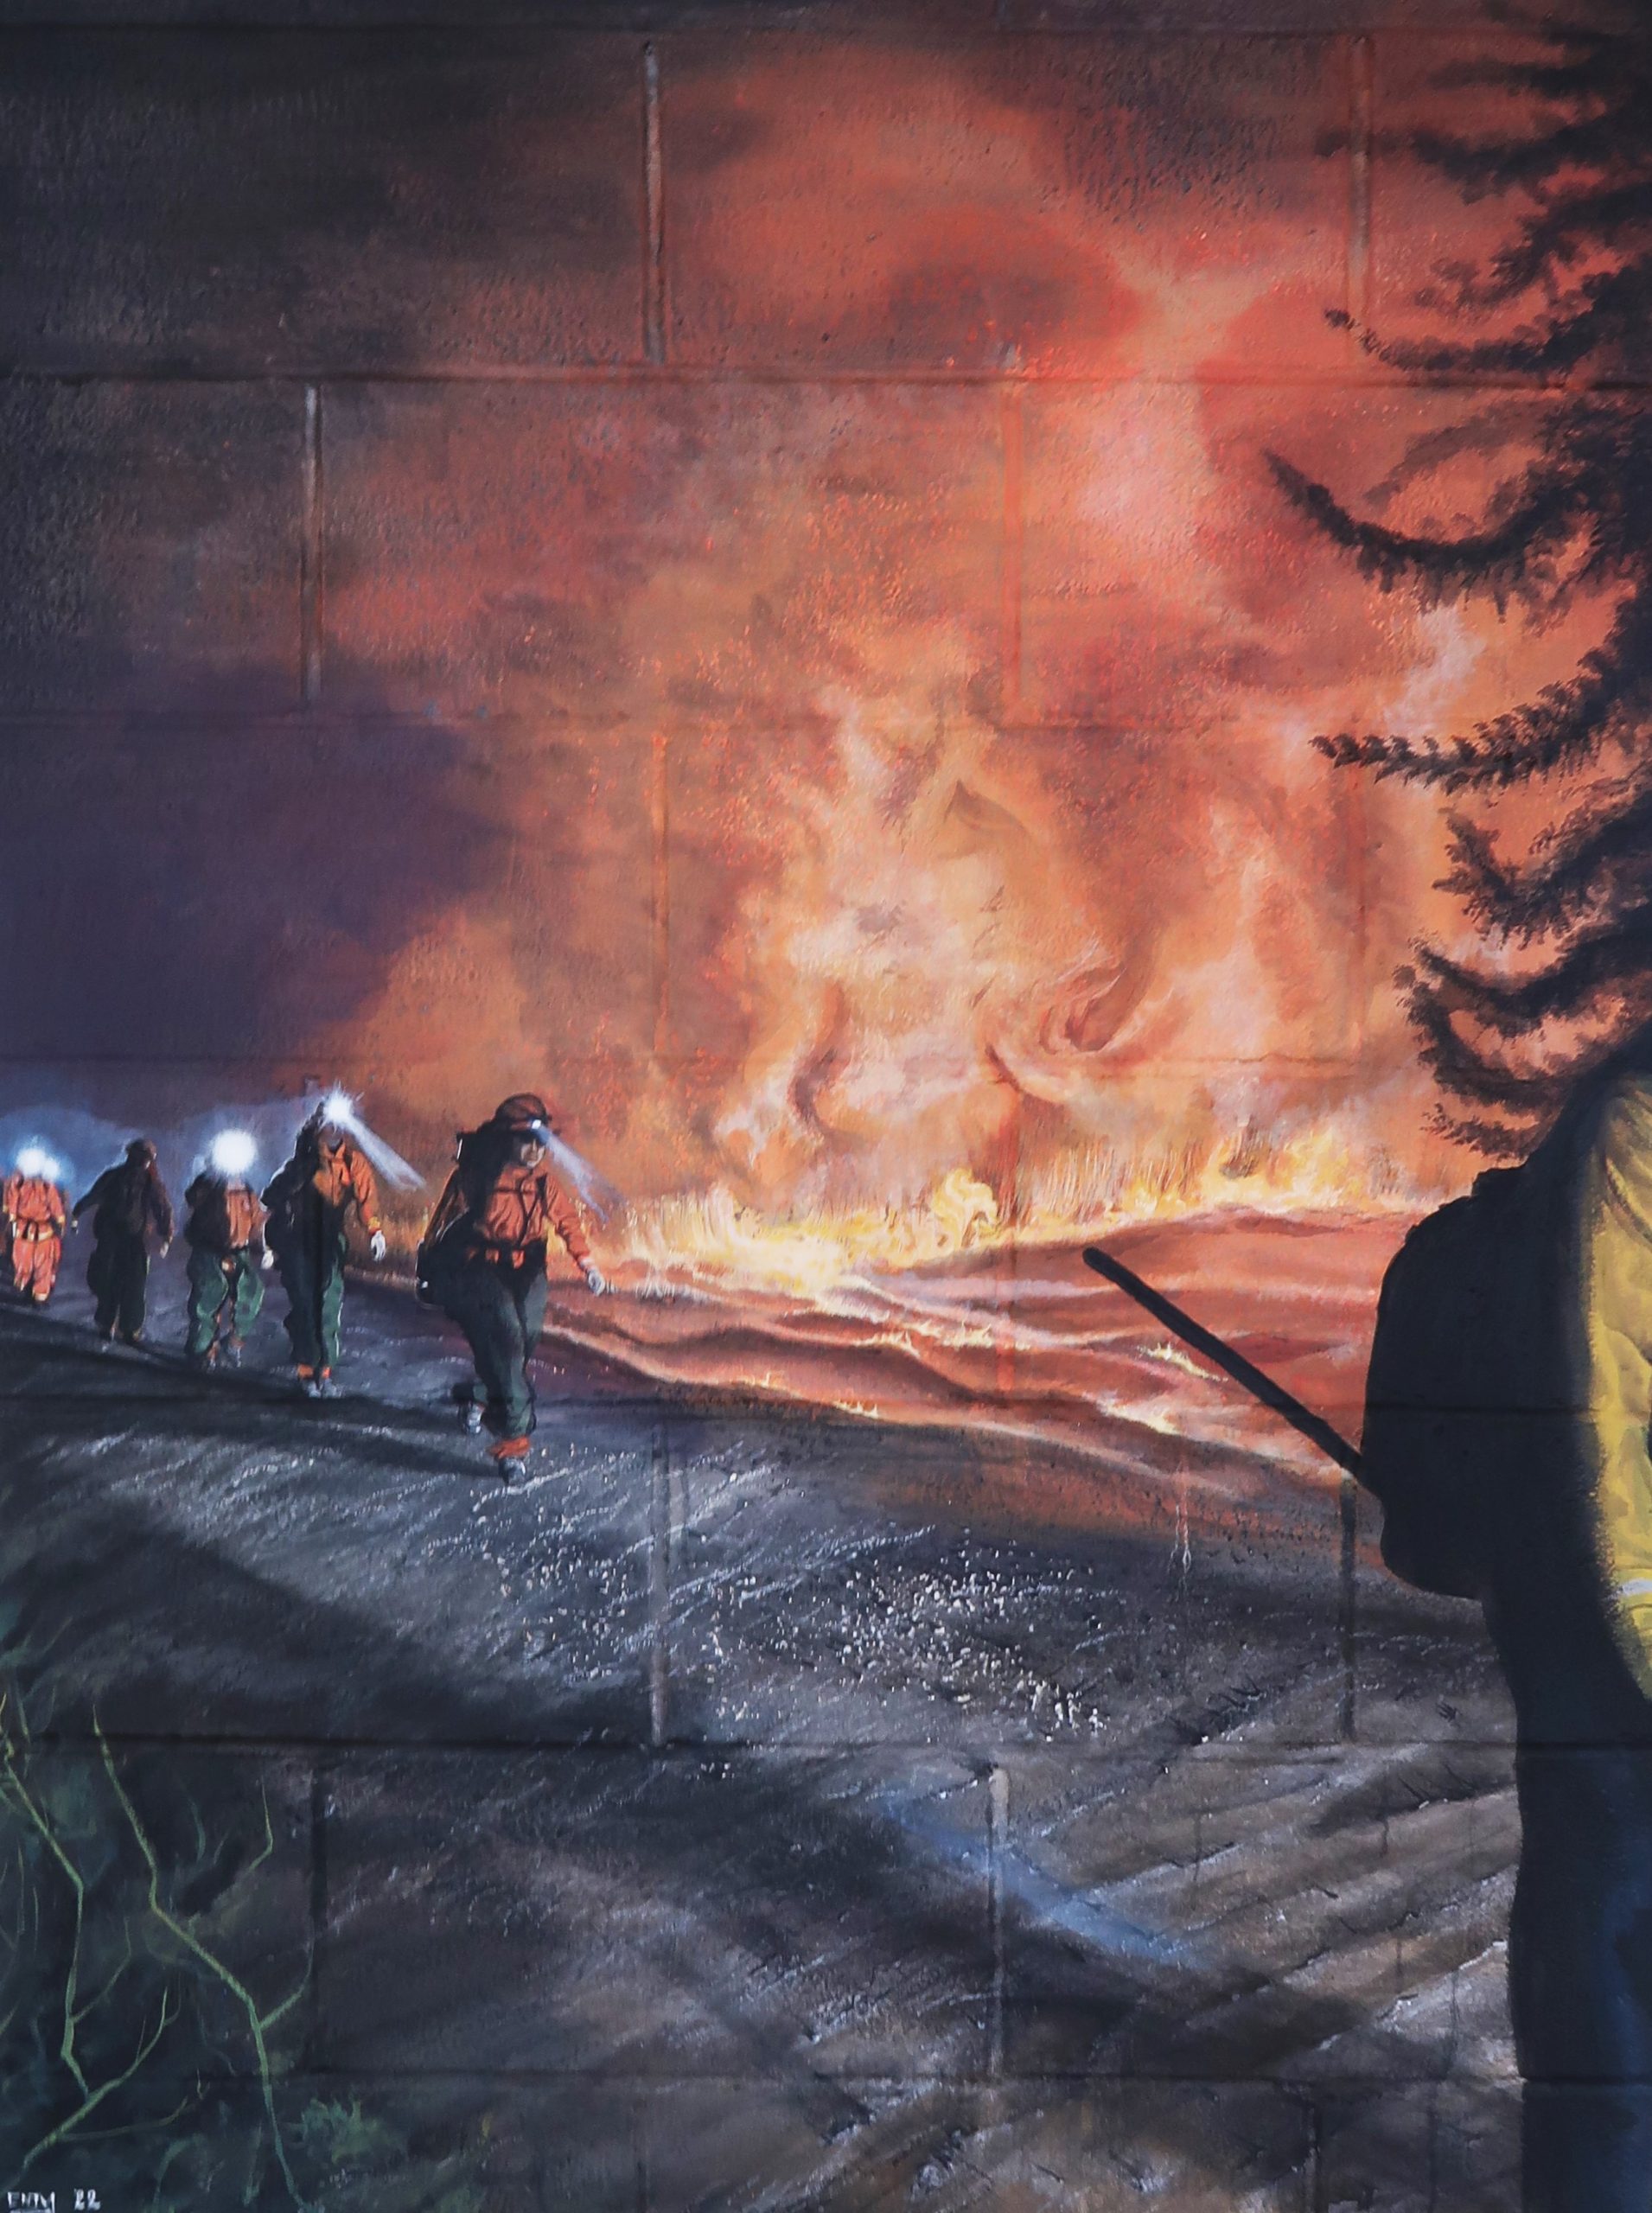 Mural of flames and firefighters.